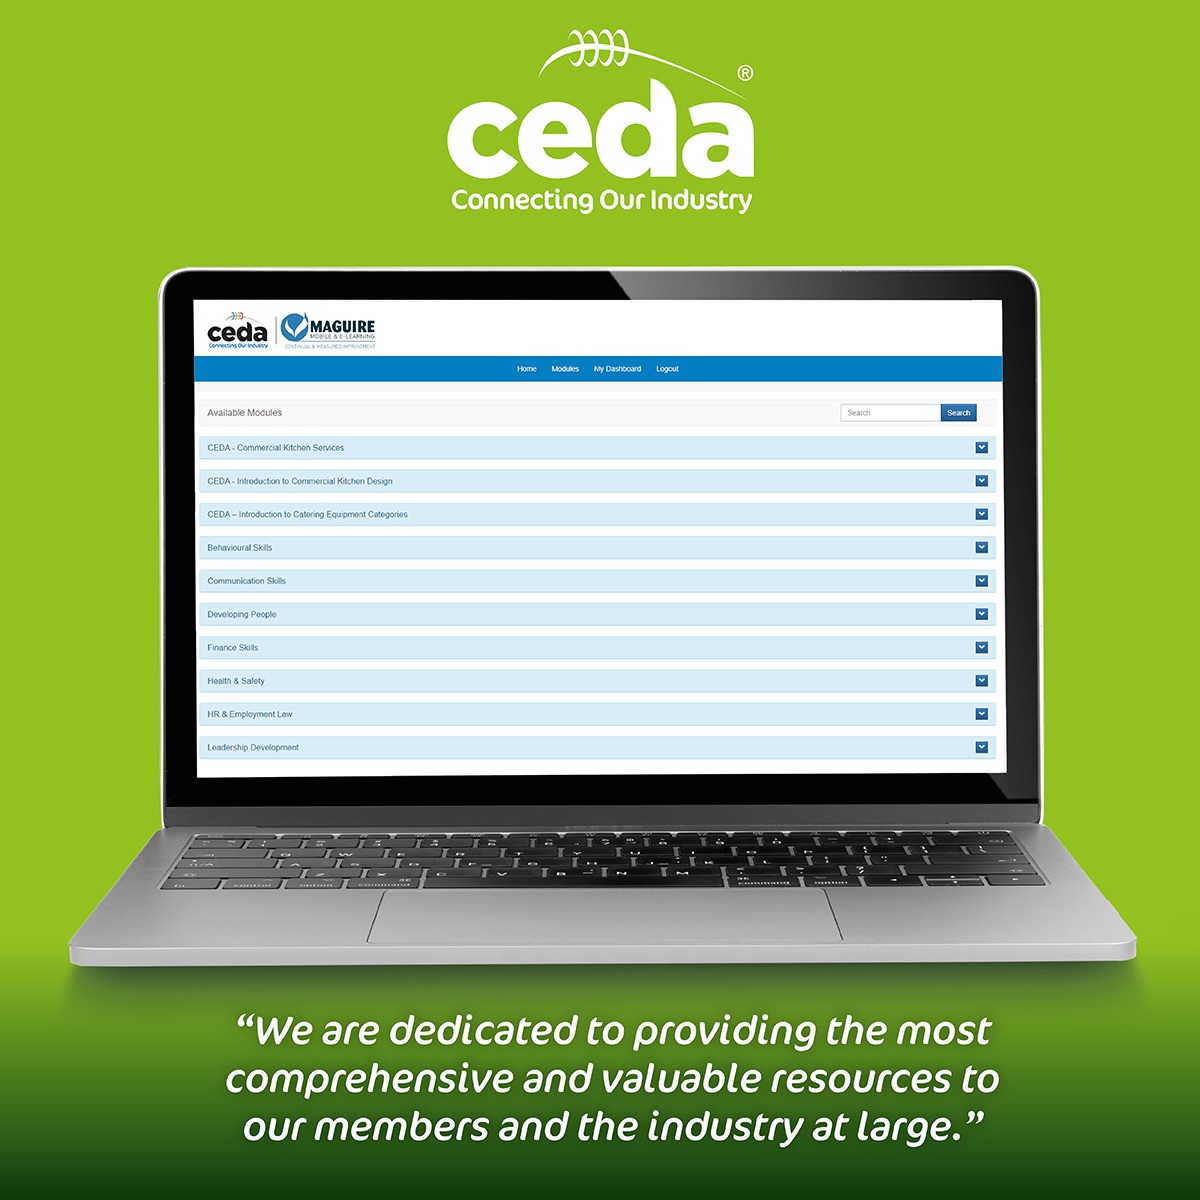 Did you know @CEDA have a great e-learning platform to up-skill your workforce? Their platform holds nearly 100 generic business modules of learning. #hospitality #training ceda.maguiretraining.co.uk/displayengines…